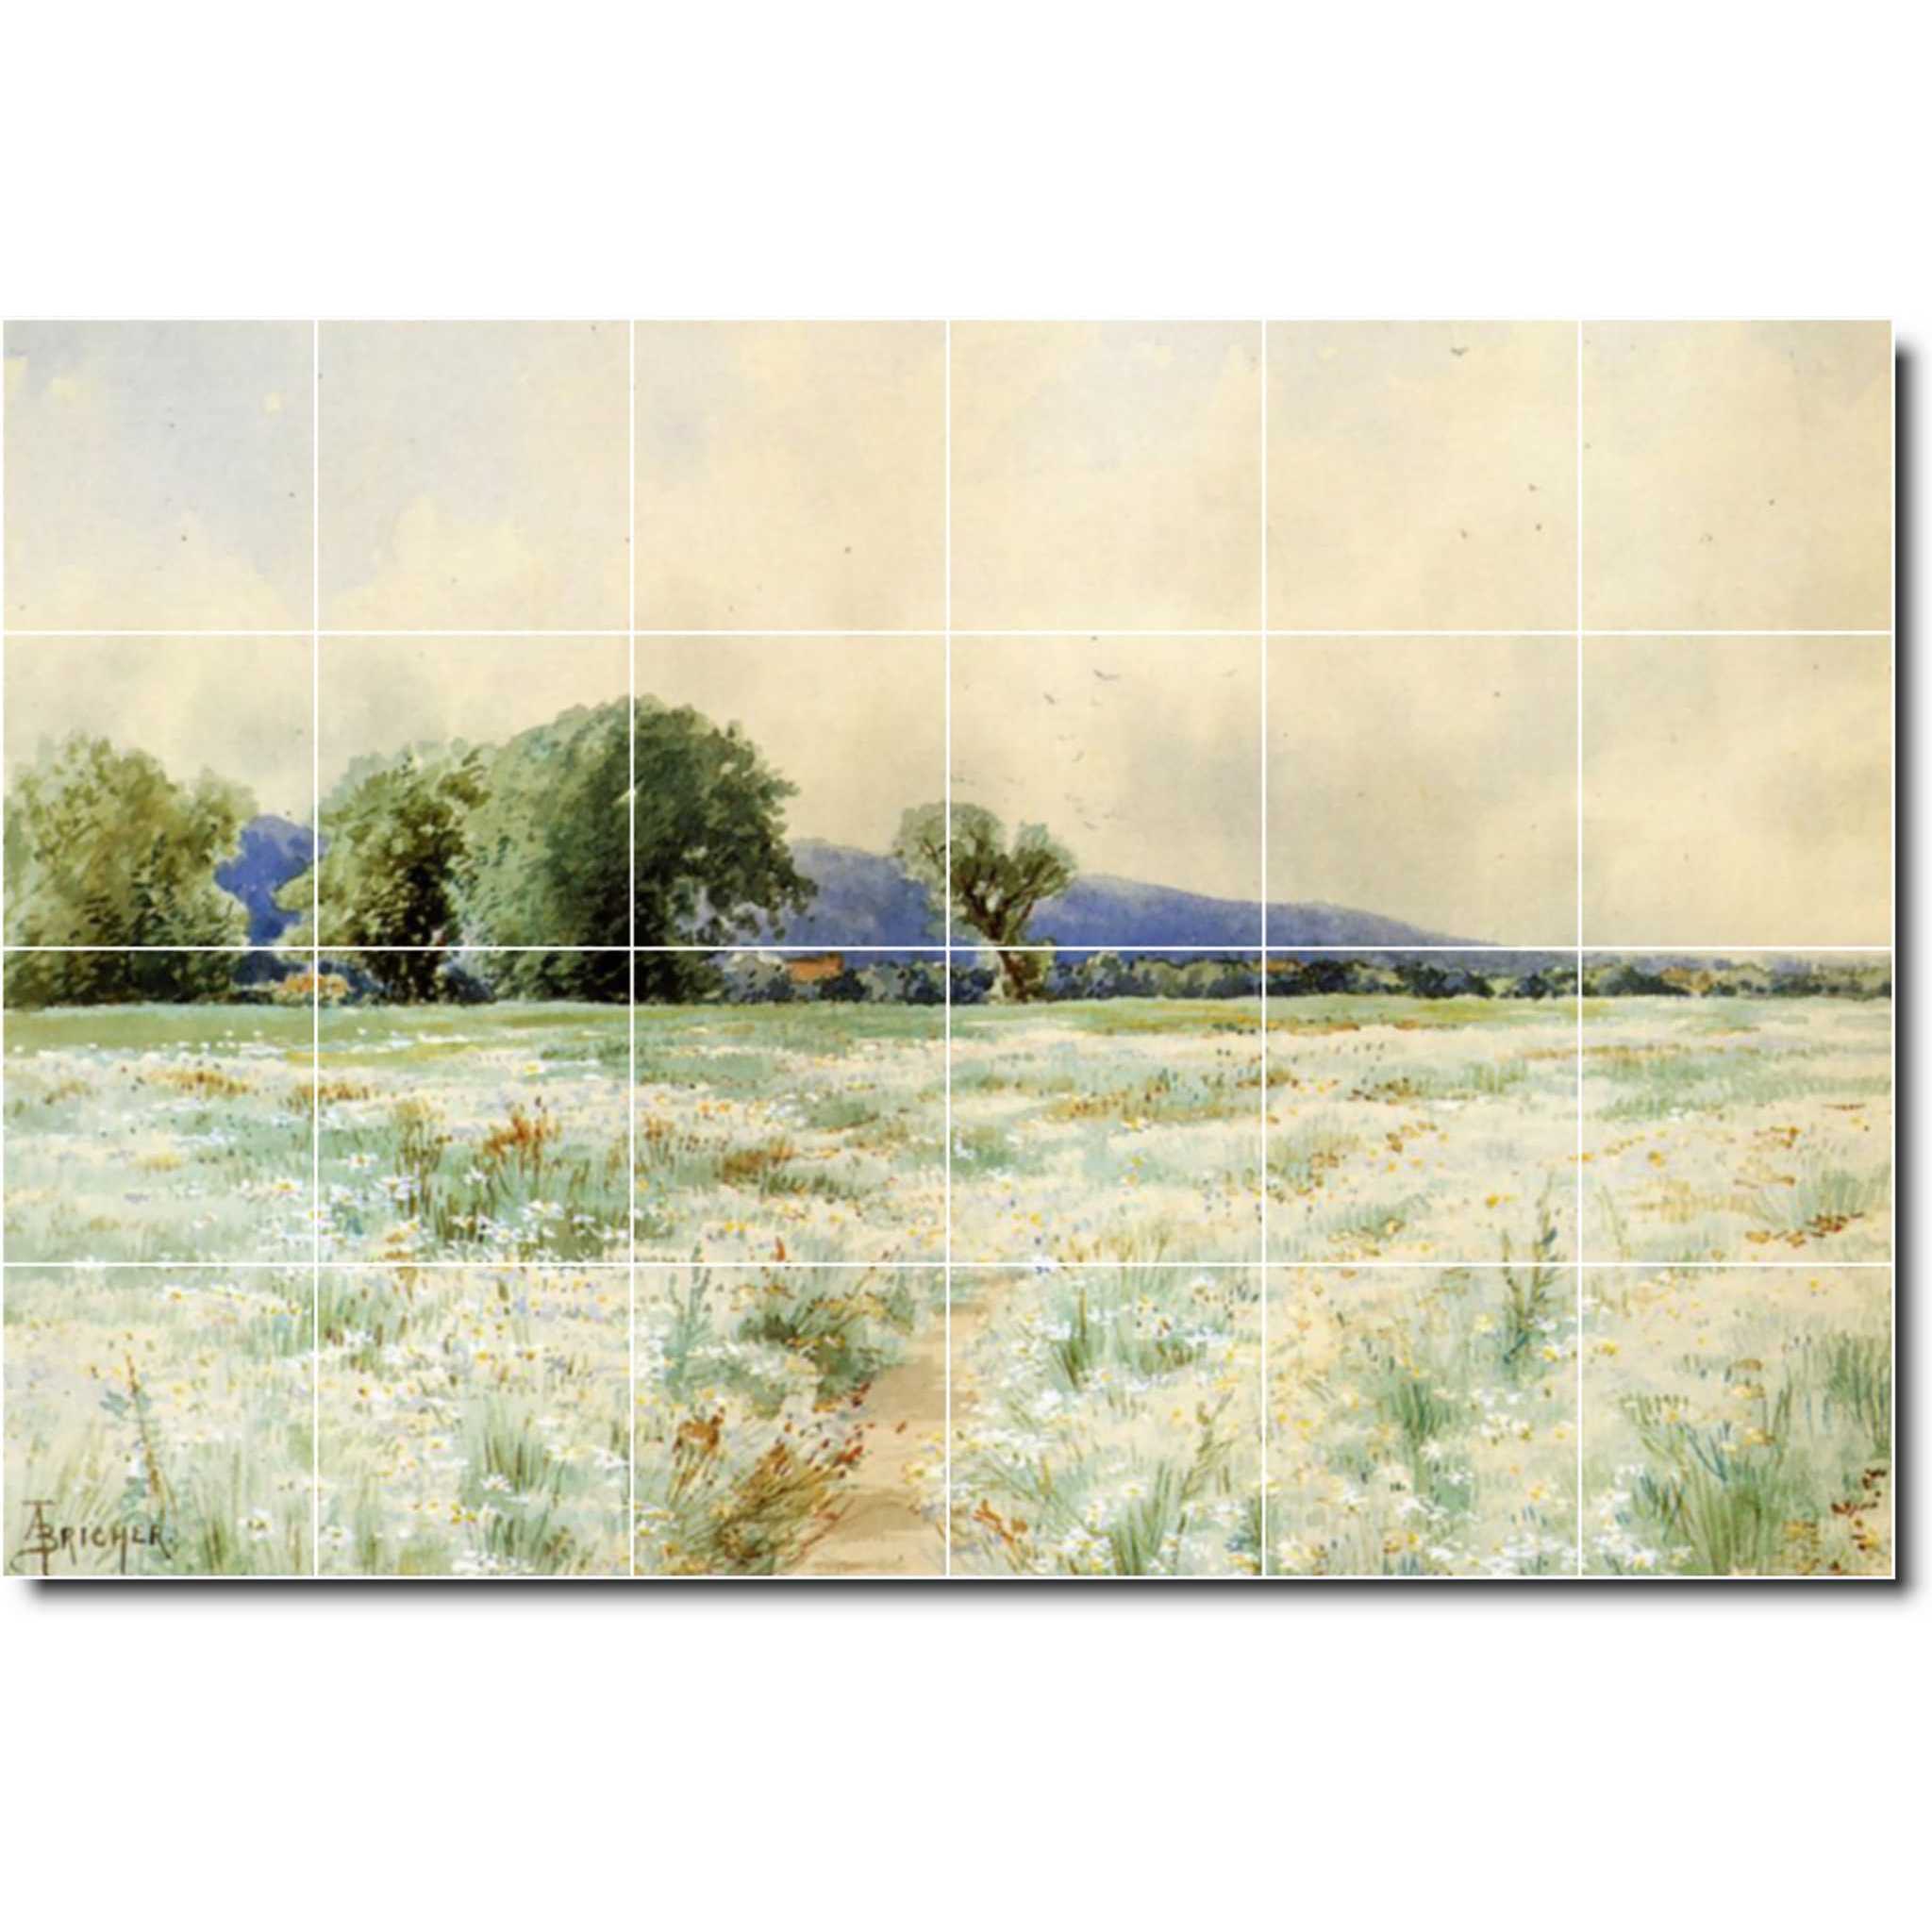 alfred bricher country painting ceramic tile mural p01068